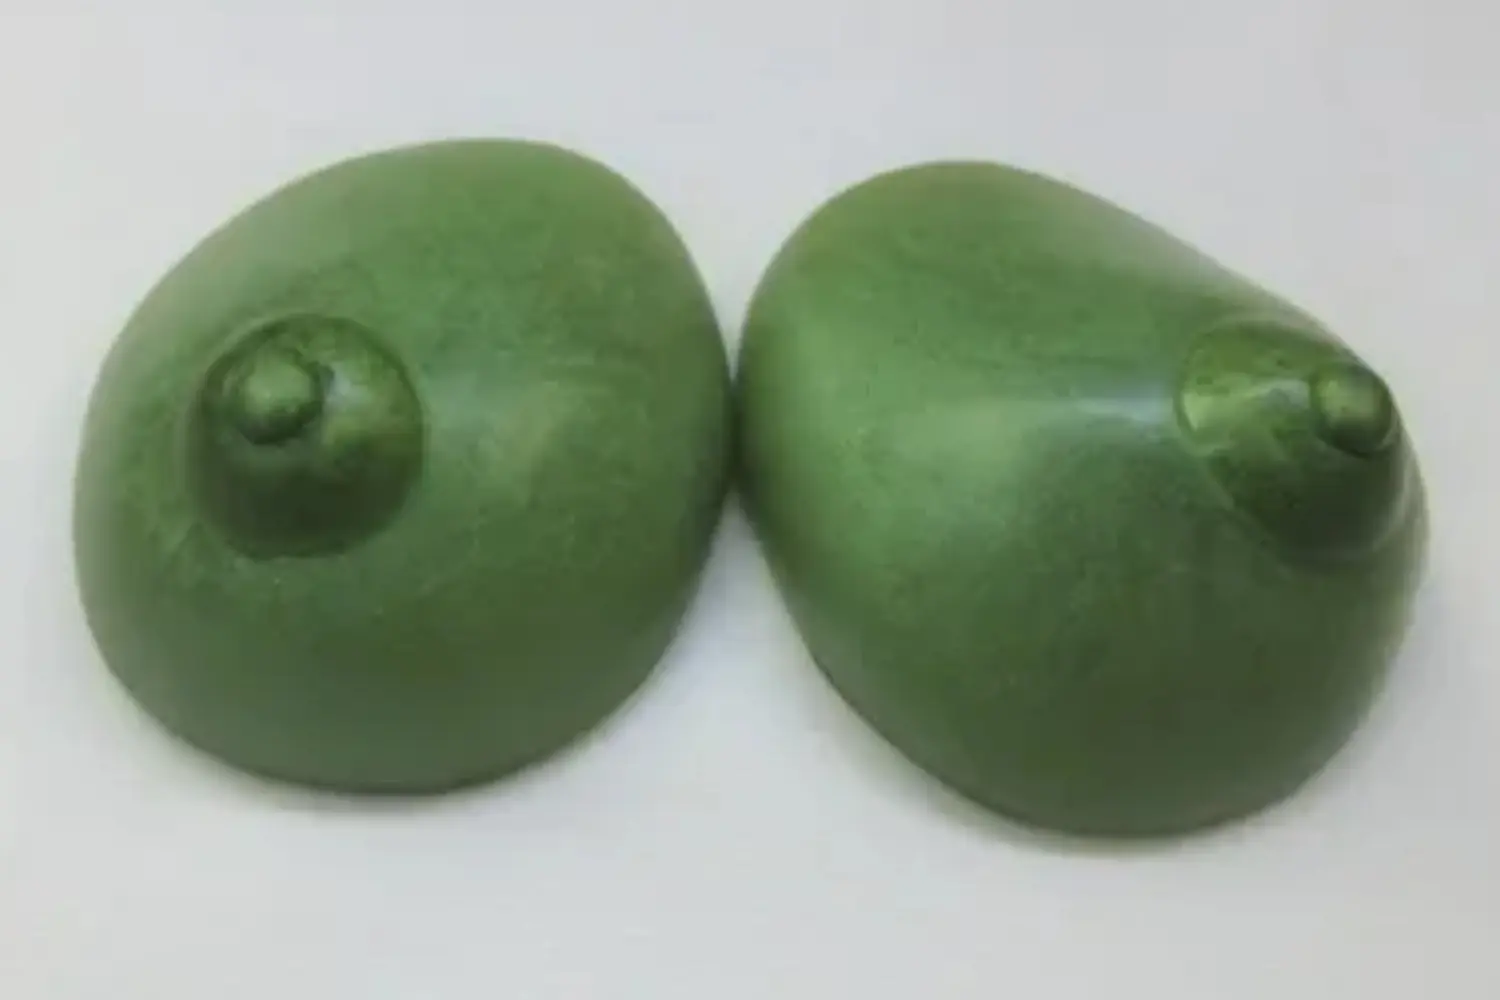 Two green apples sitting on top of a table.